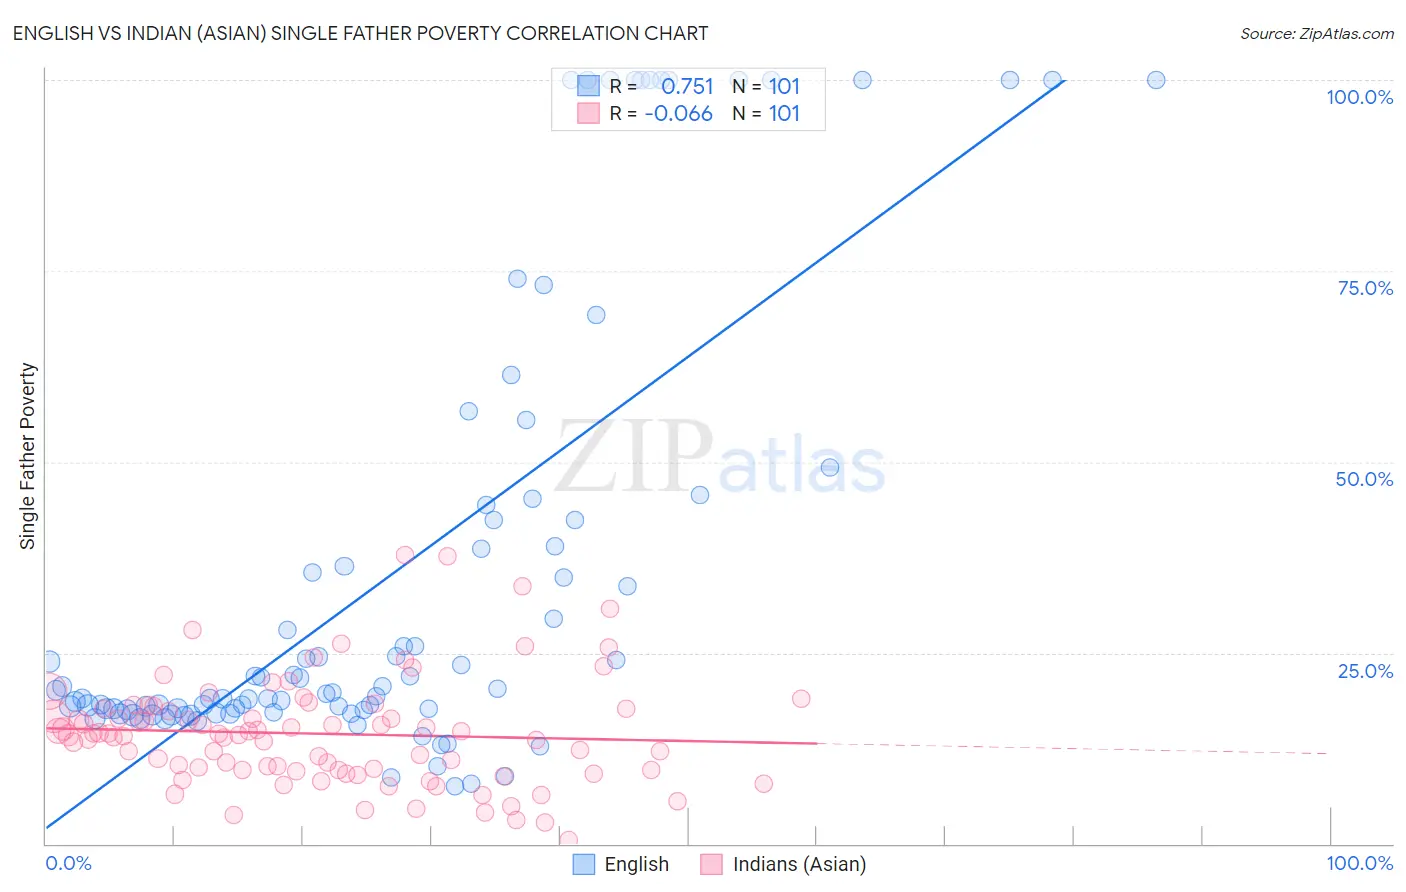 English vs Indian (Asian) Single Father Poverty